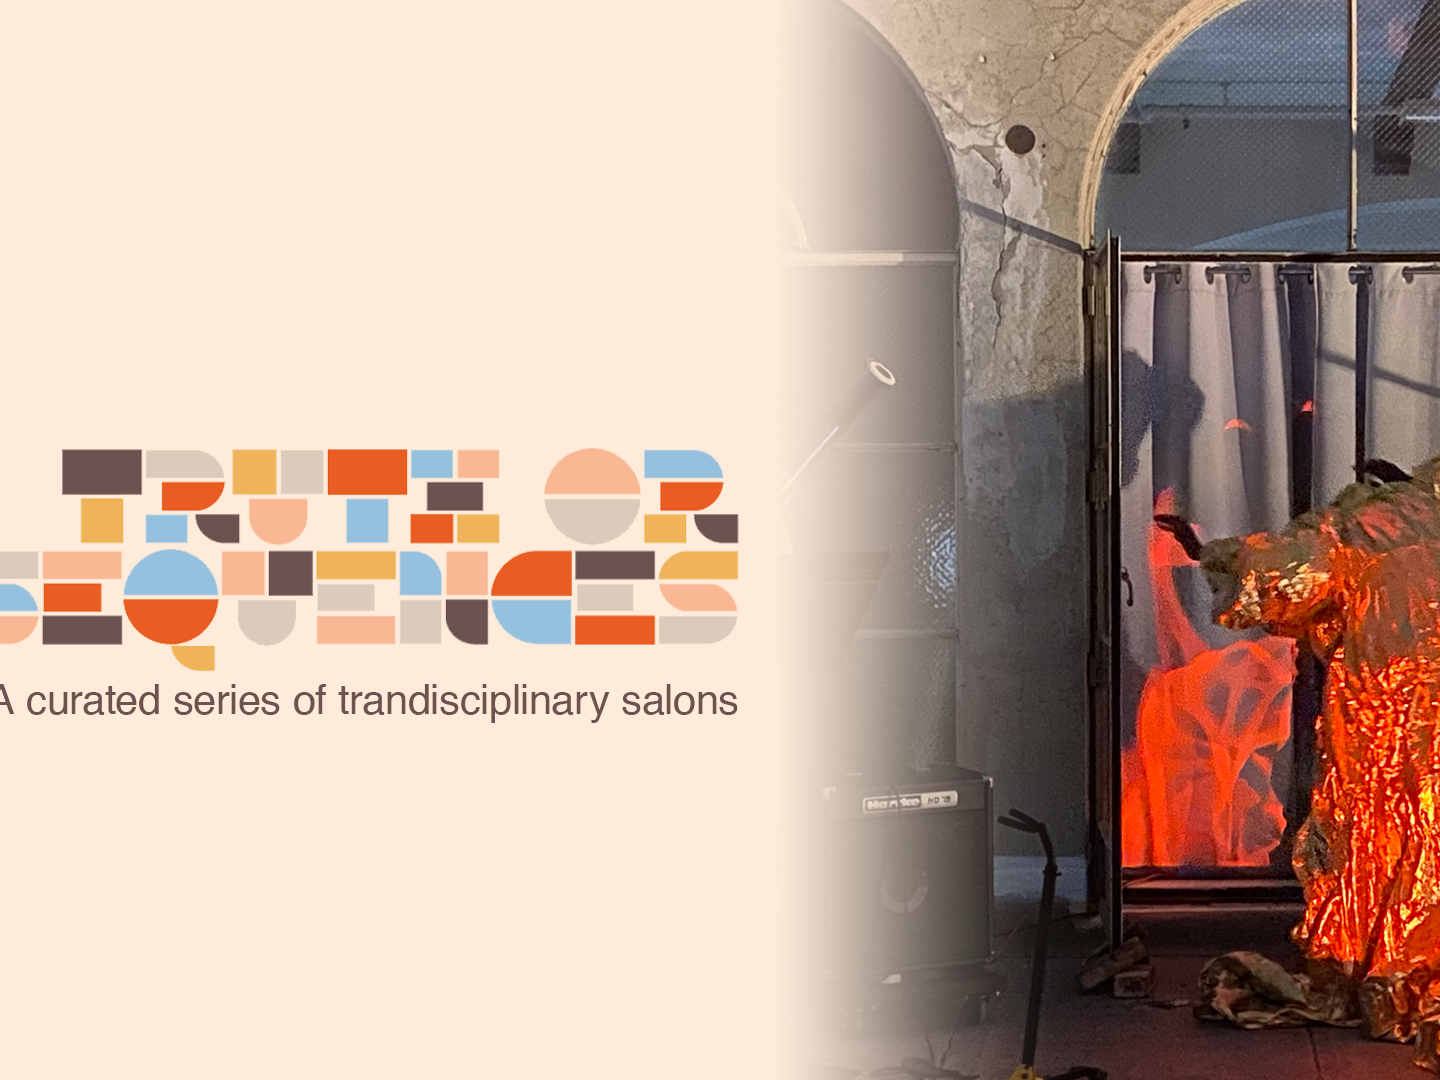 Alt: On the left half of the image: a cream color background with colorful text that reads Truth or Consequences, A curated series of transdisciplinary salons. On the right: A woman in a gold, flowy dress leans agains a window while fire is being projected unto her.